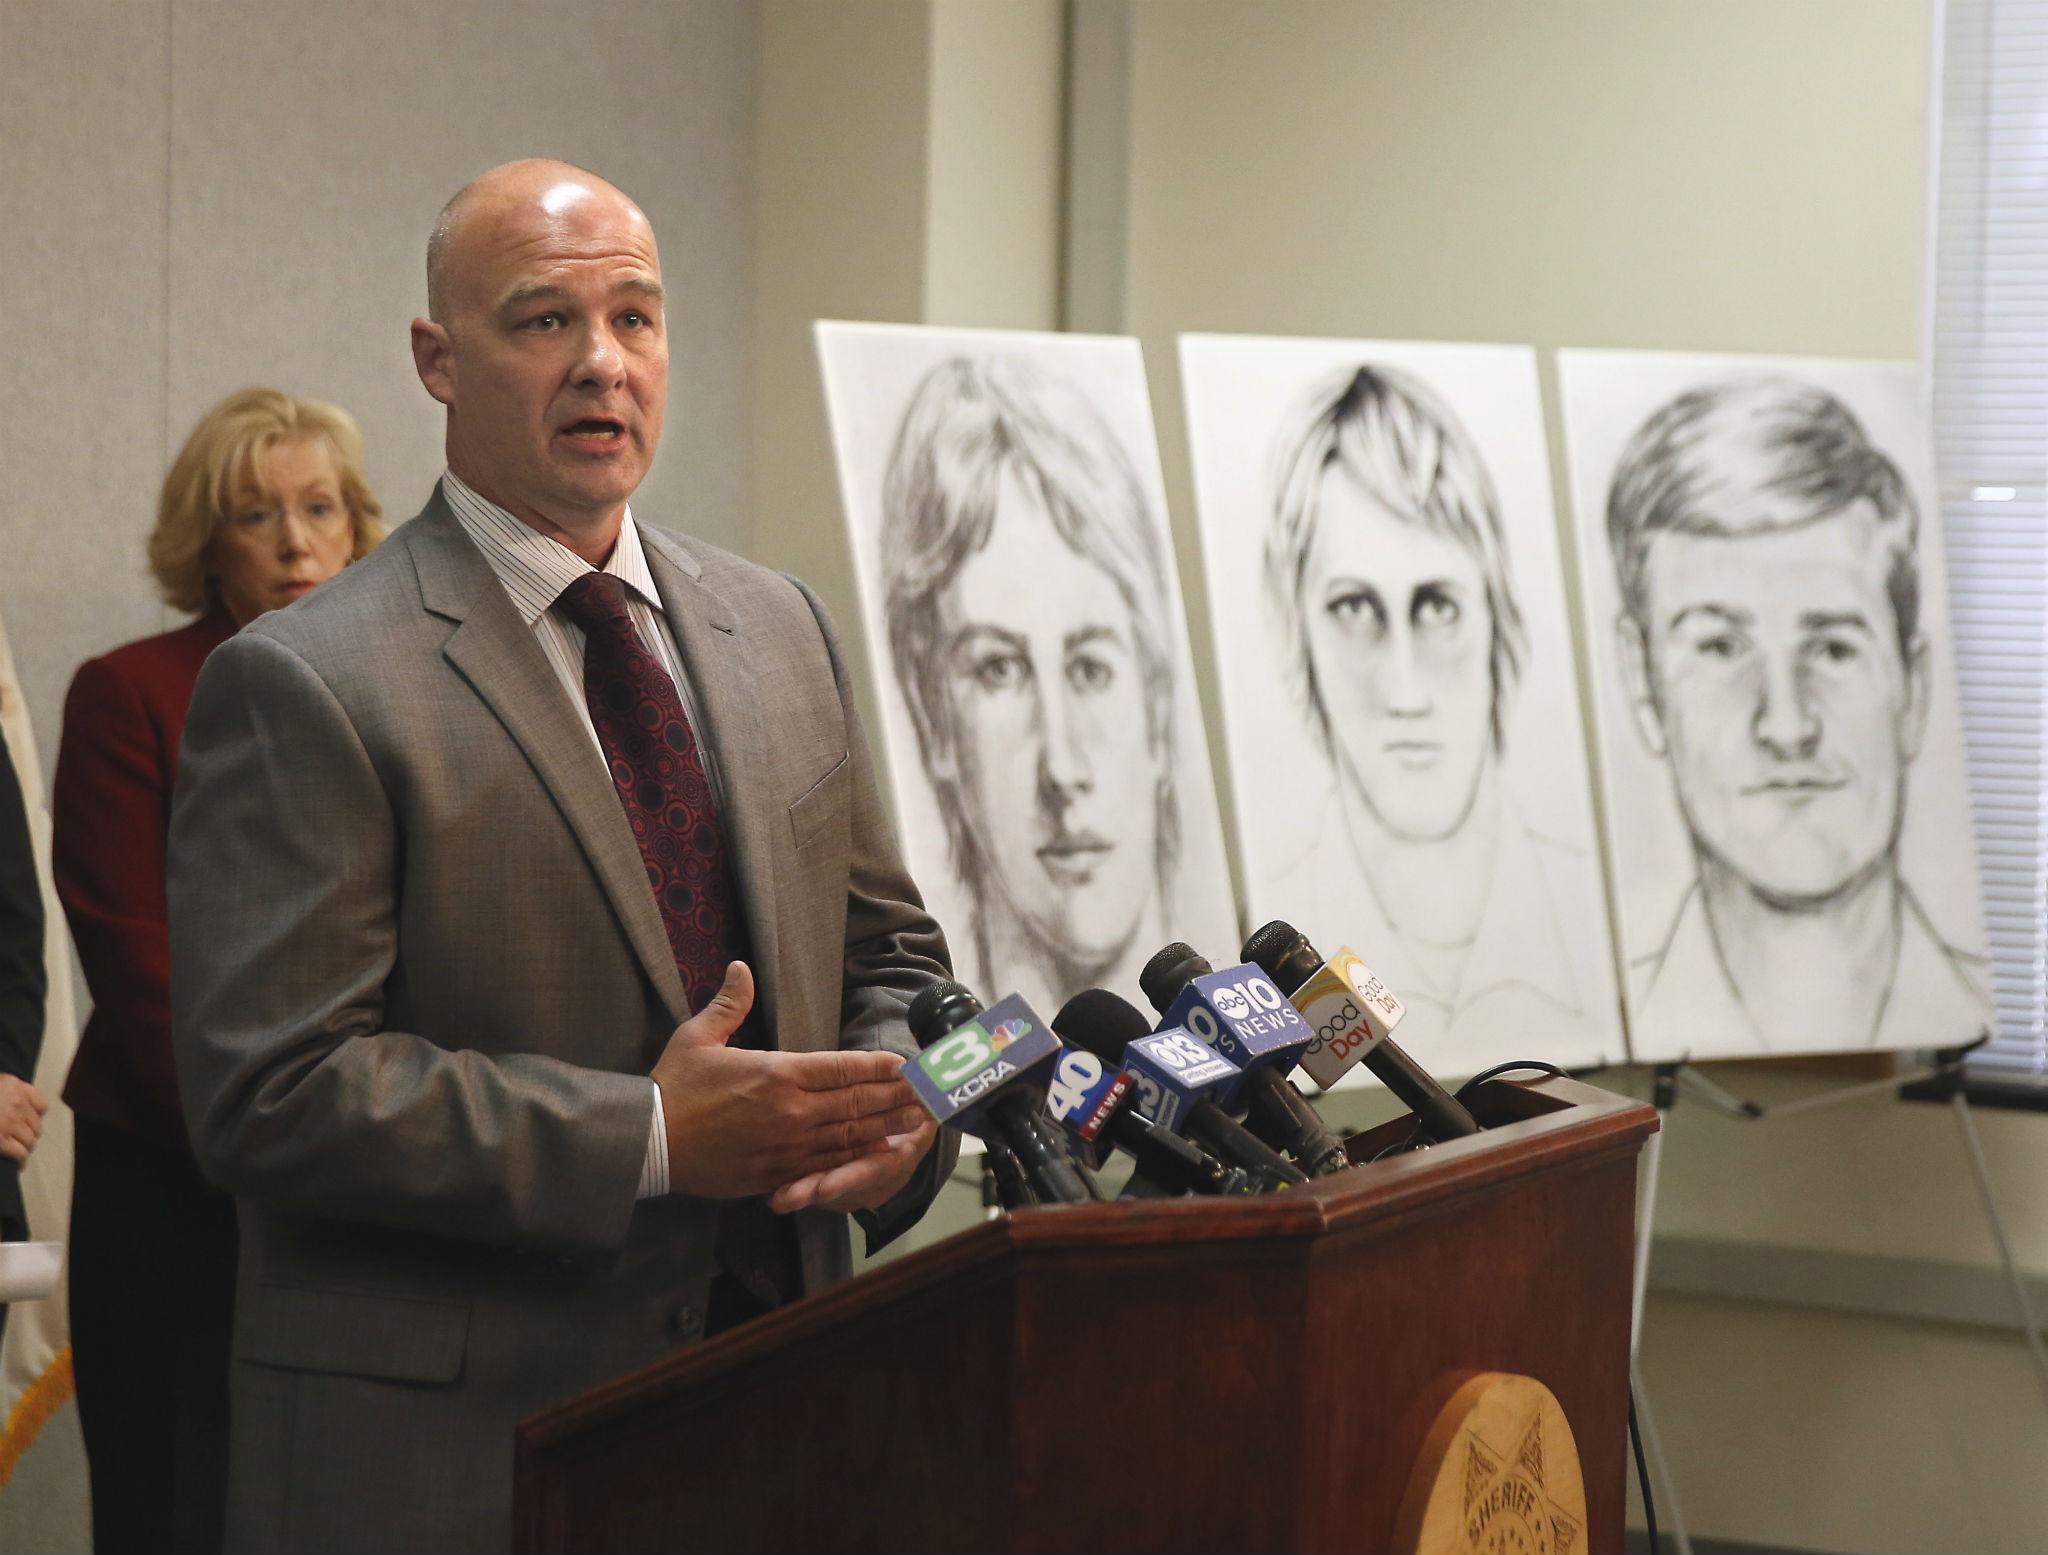 Sacramento Police Sergeant Paul Belli with police drawings of the suspected serial killer known as the 'East Area Rapist'